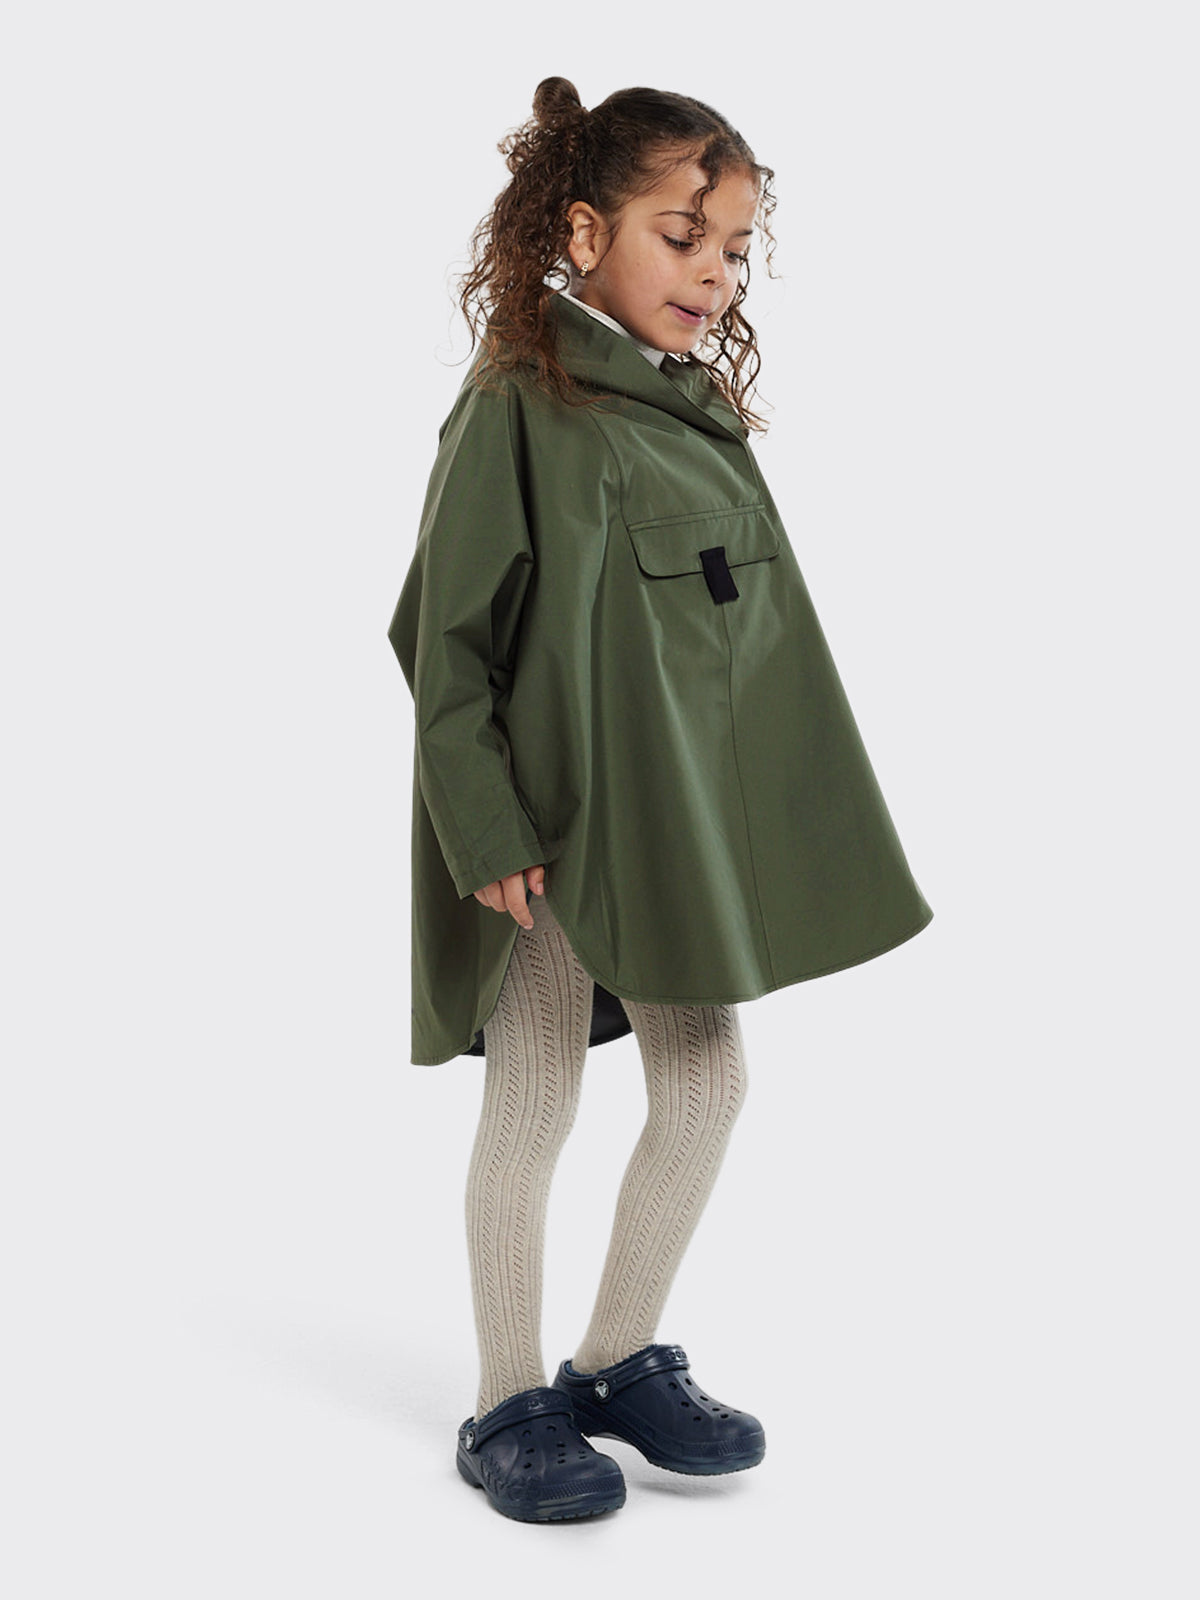 Kid wearing Bergen mini poncho by Blæst in the color Dusty Green